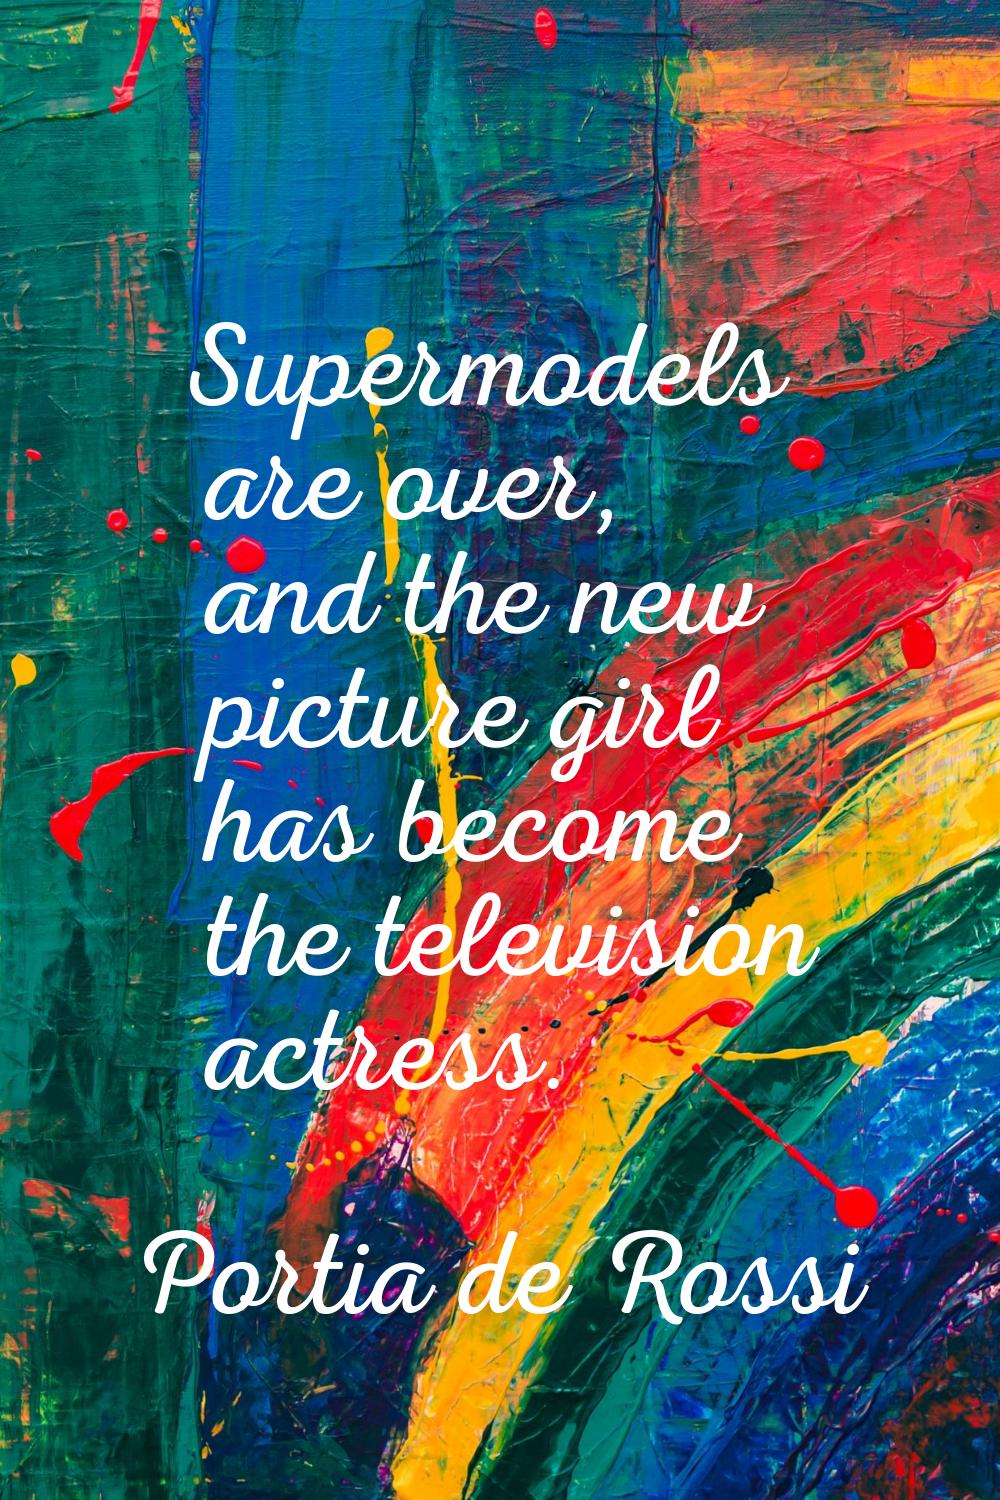 Supermodels are over, and the new picture girl has become the television actress.